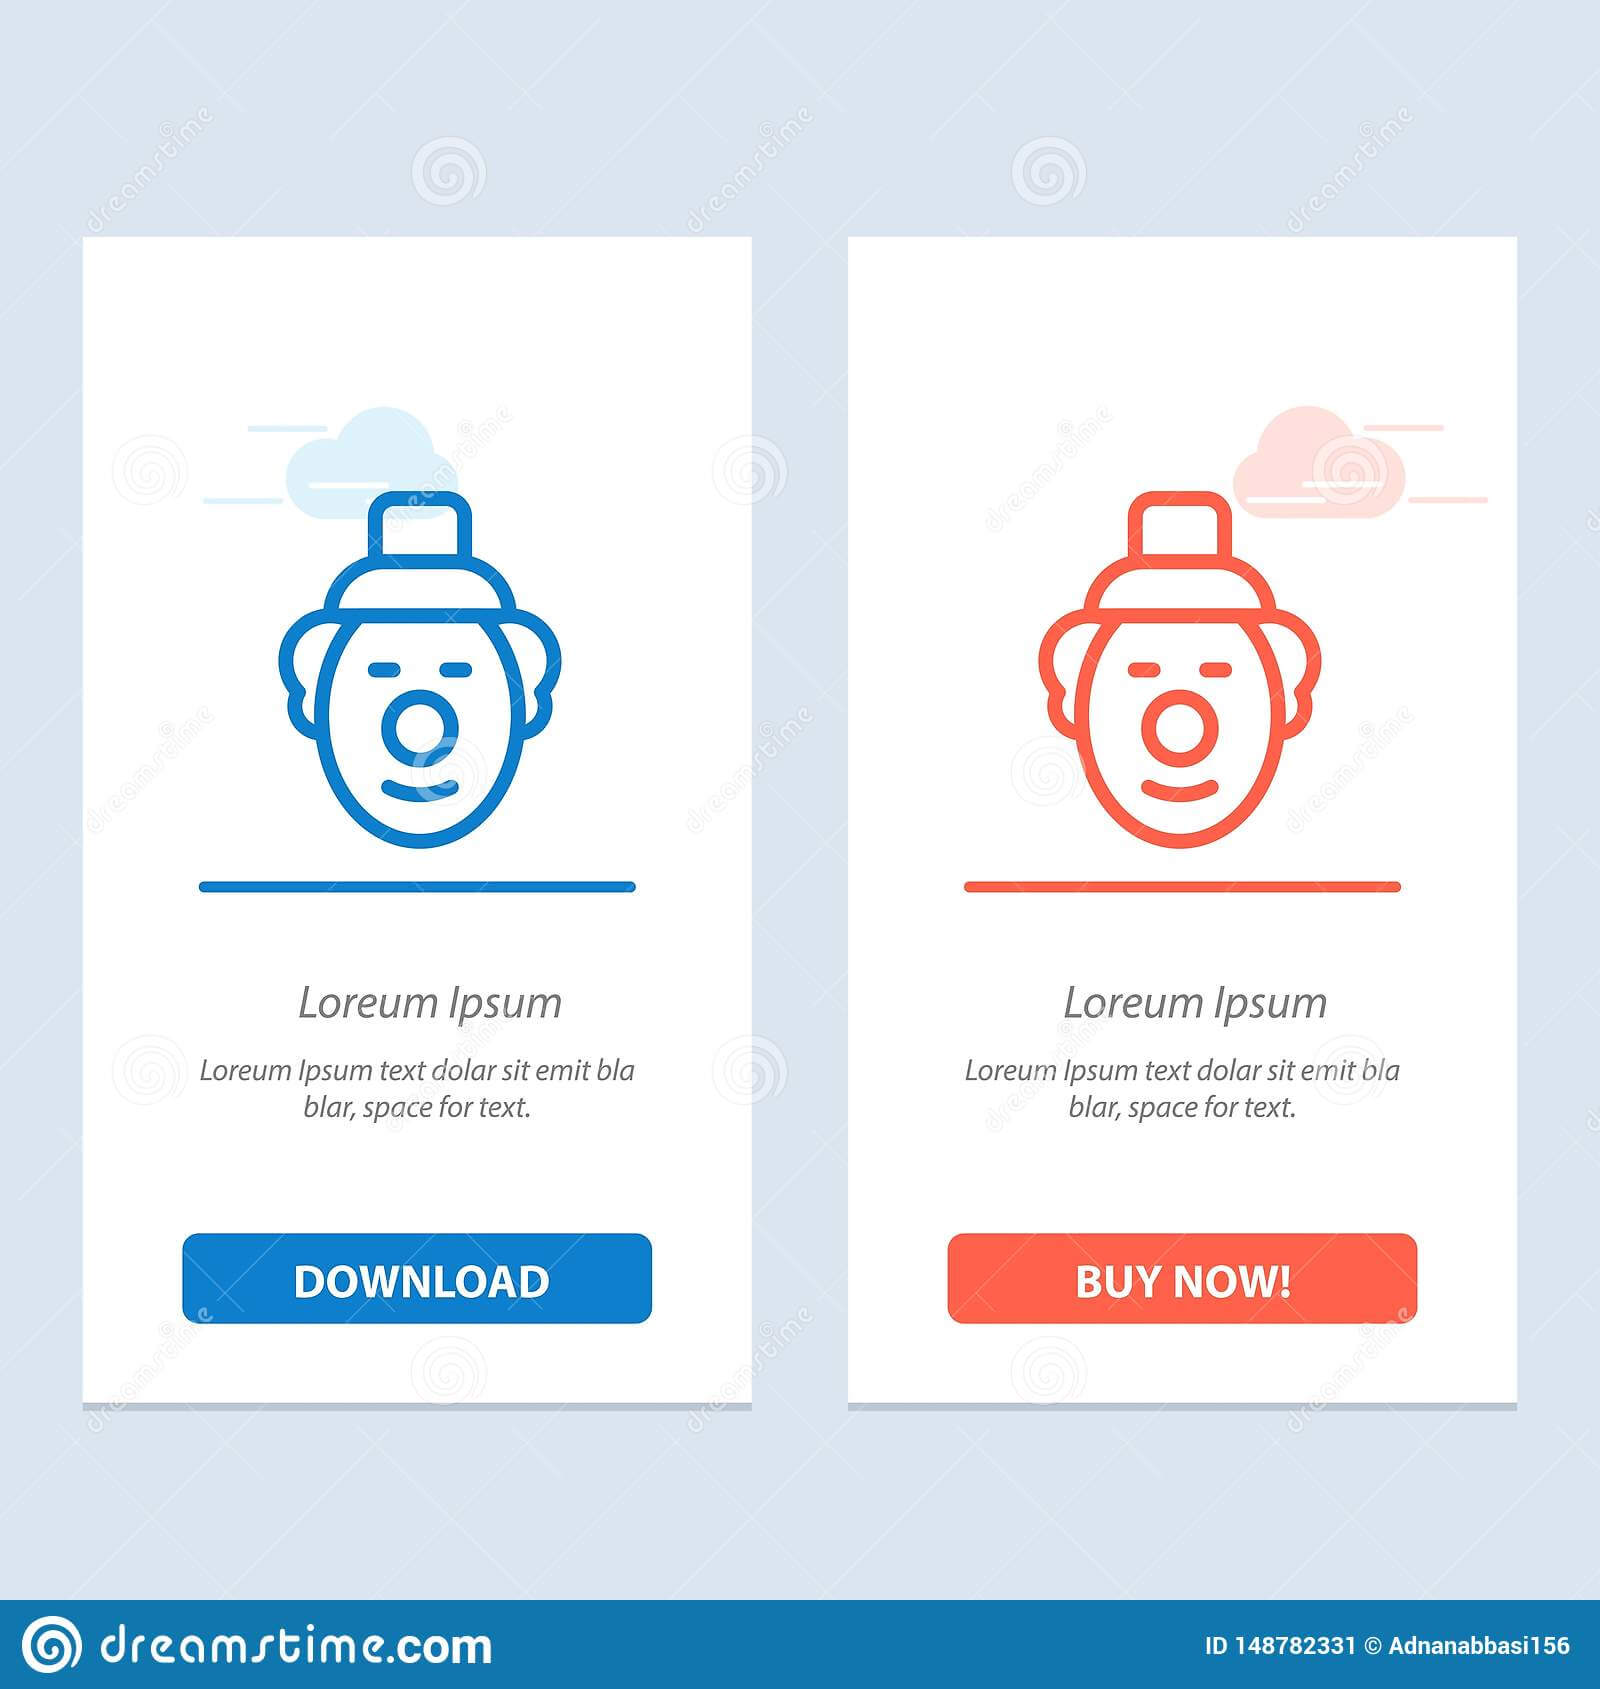 Joker, Clown, Circus Blue And Red Download And Buy Now Web With Joker Card Template